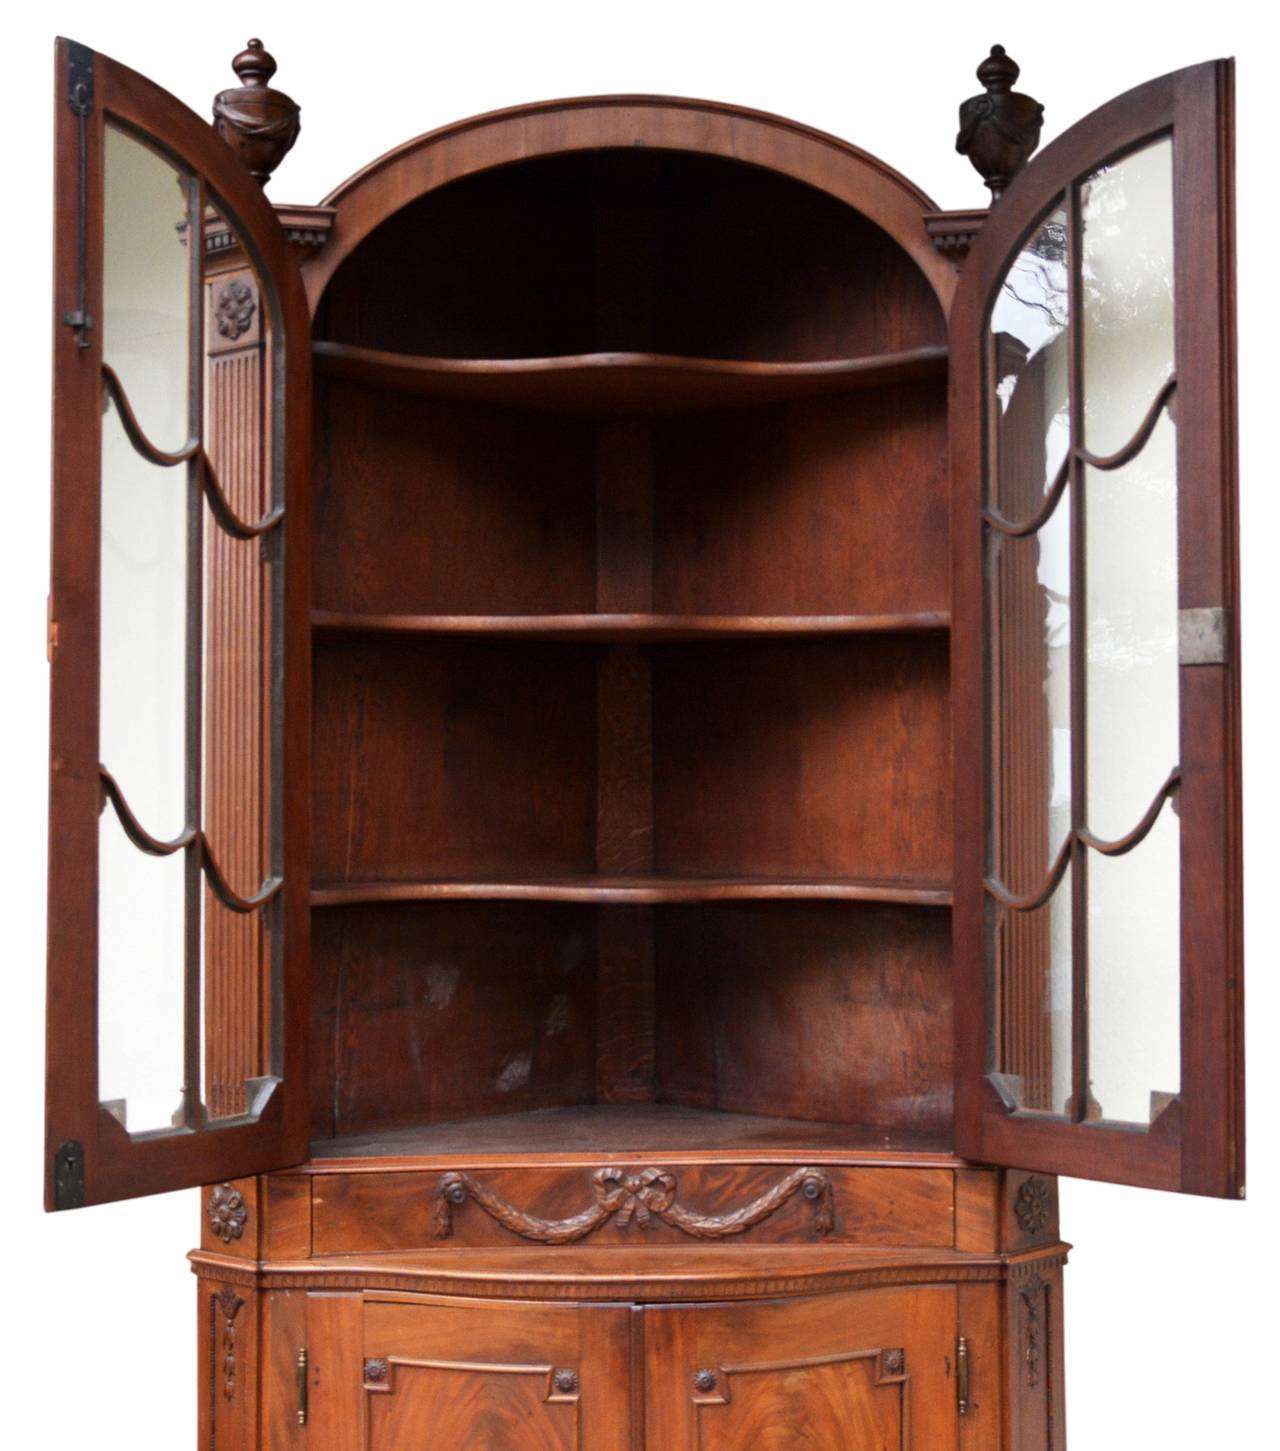 Rare Empire style corner cabinet from Luebeck, 1800s. Mahogany on oak wood ground.

Detailed ornamentation and neo-classical elements. Elegantly latticed windows. 

The corner cabinet is of the provenance of an important merchant's family from